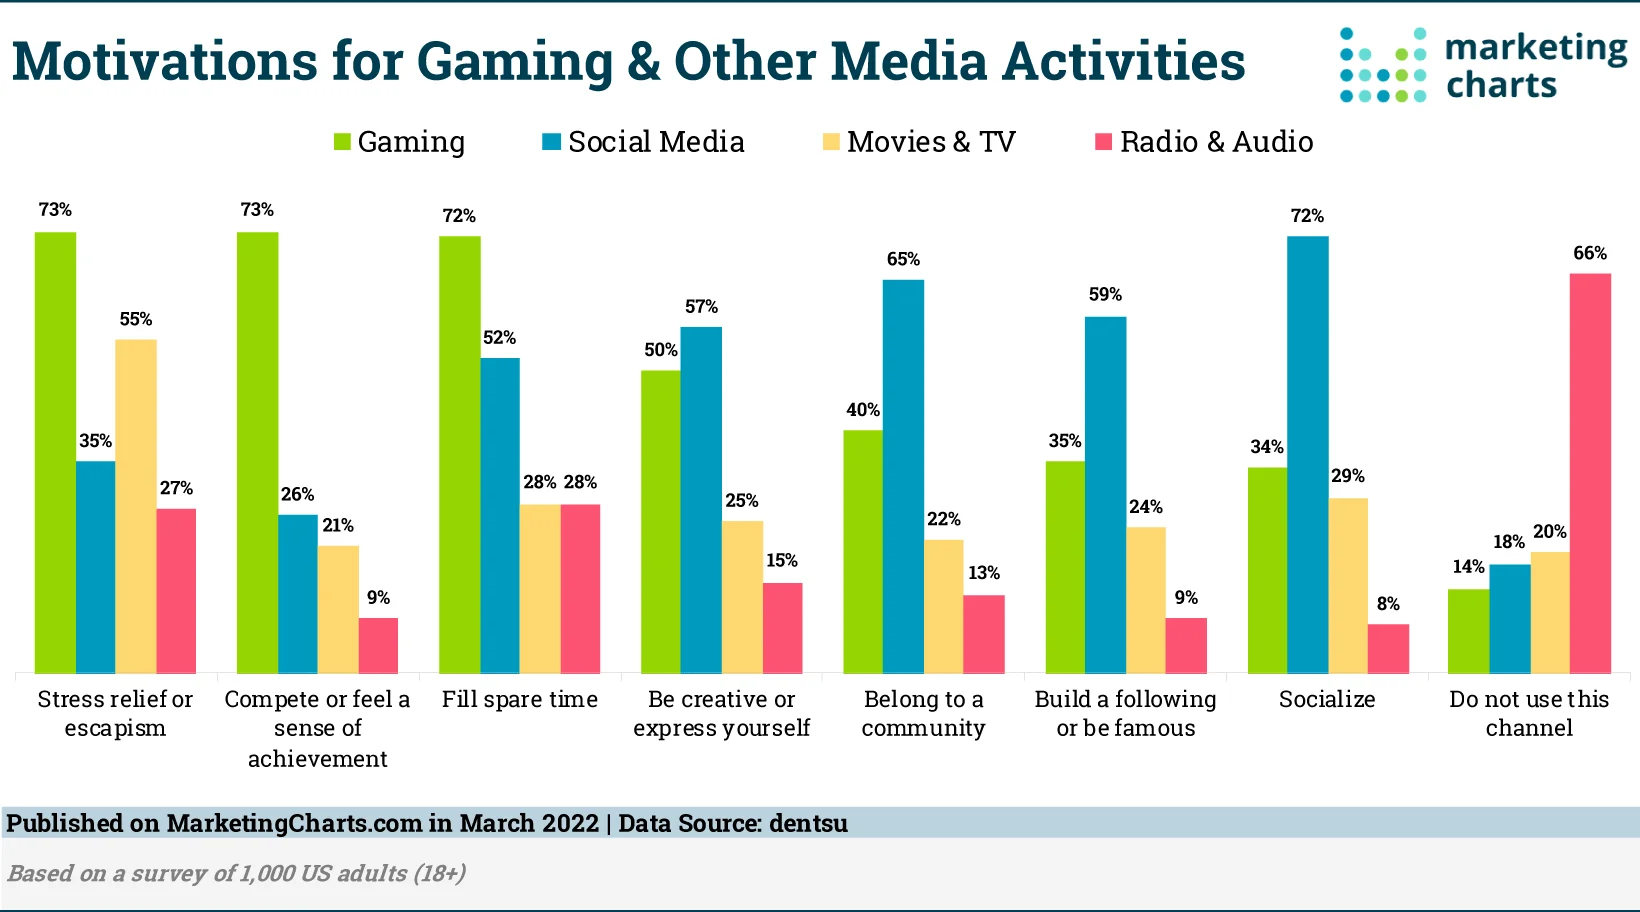 A chart showing motivations for gaming, with the highest being stress relief or escapism and competing feeling a sense of achievement at 73%